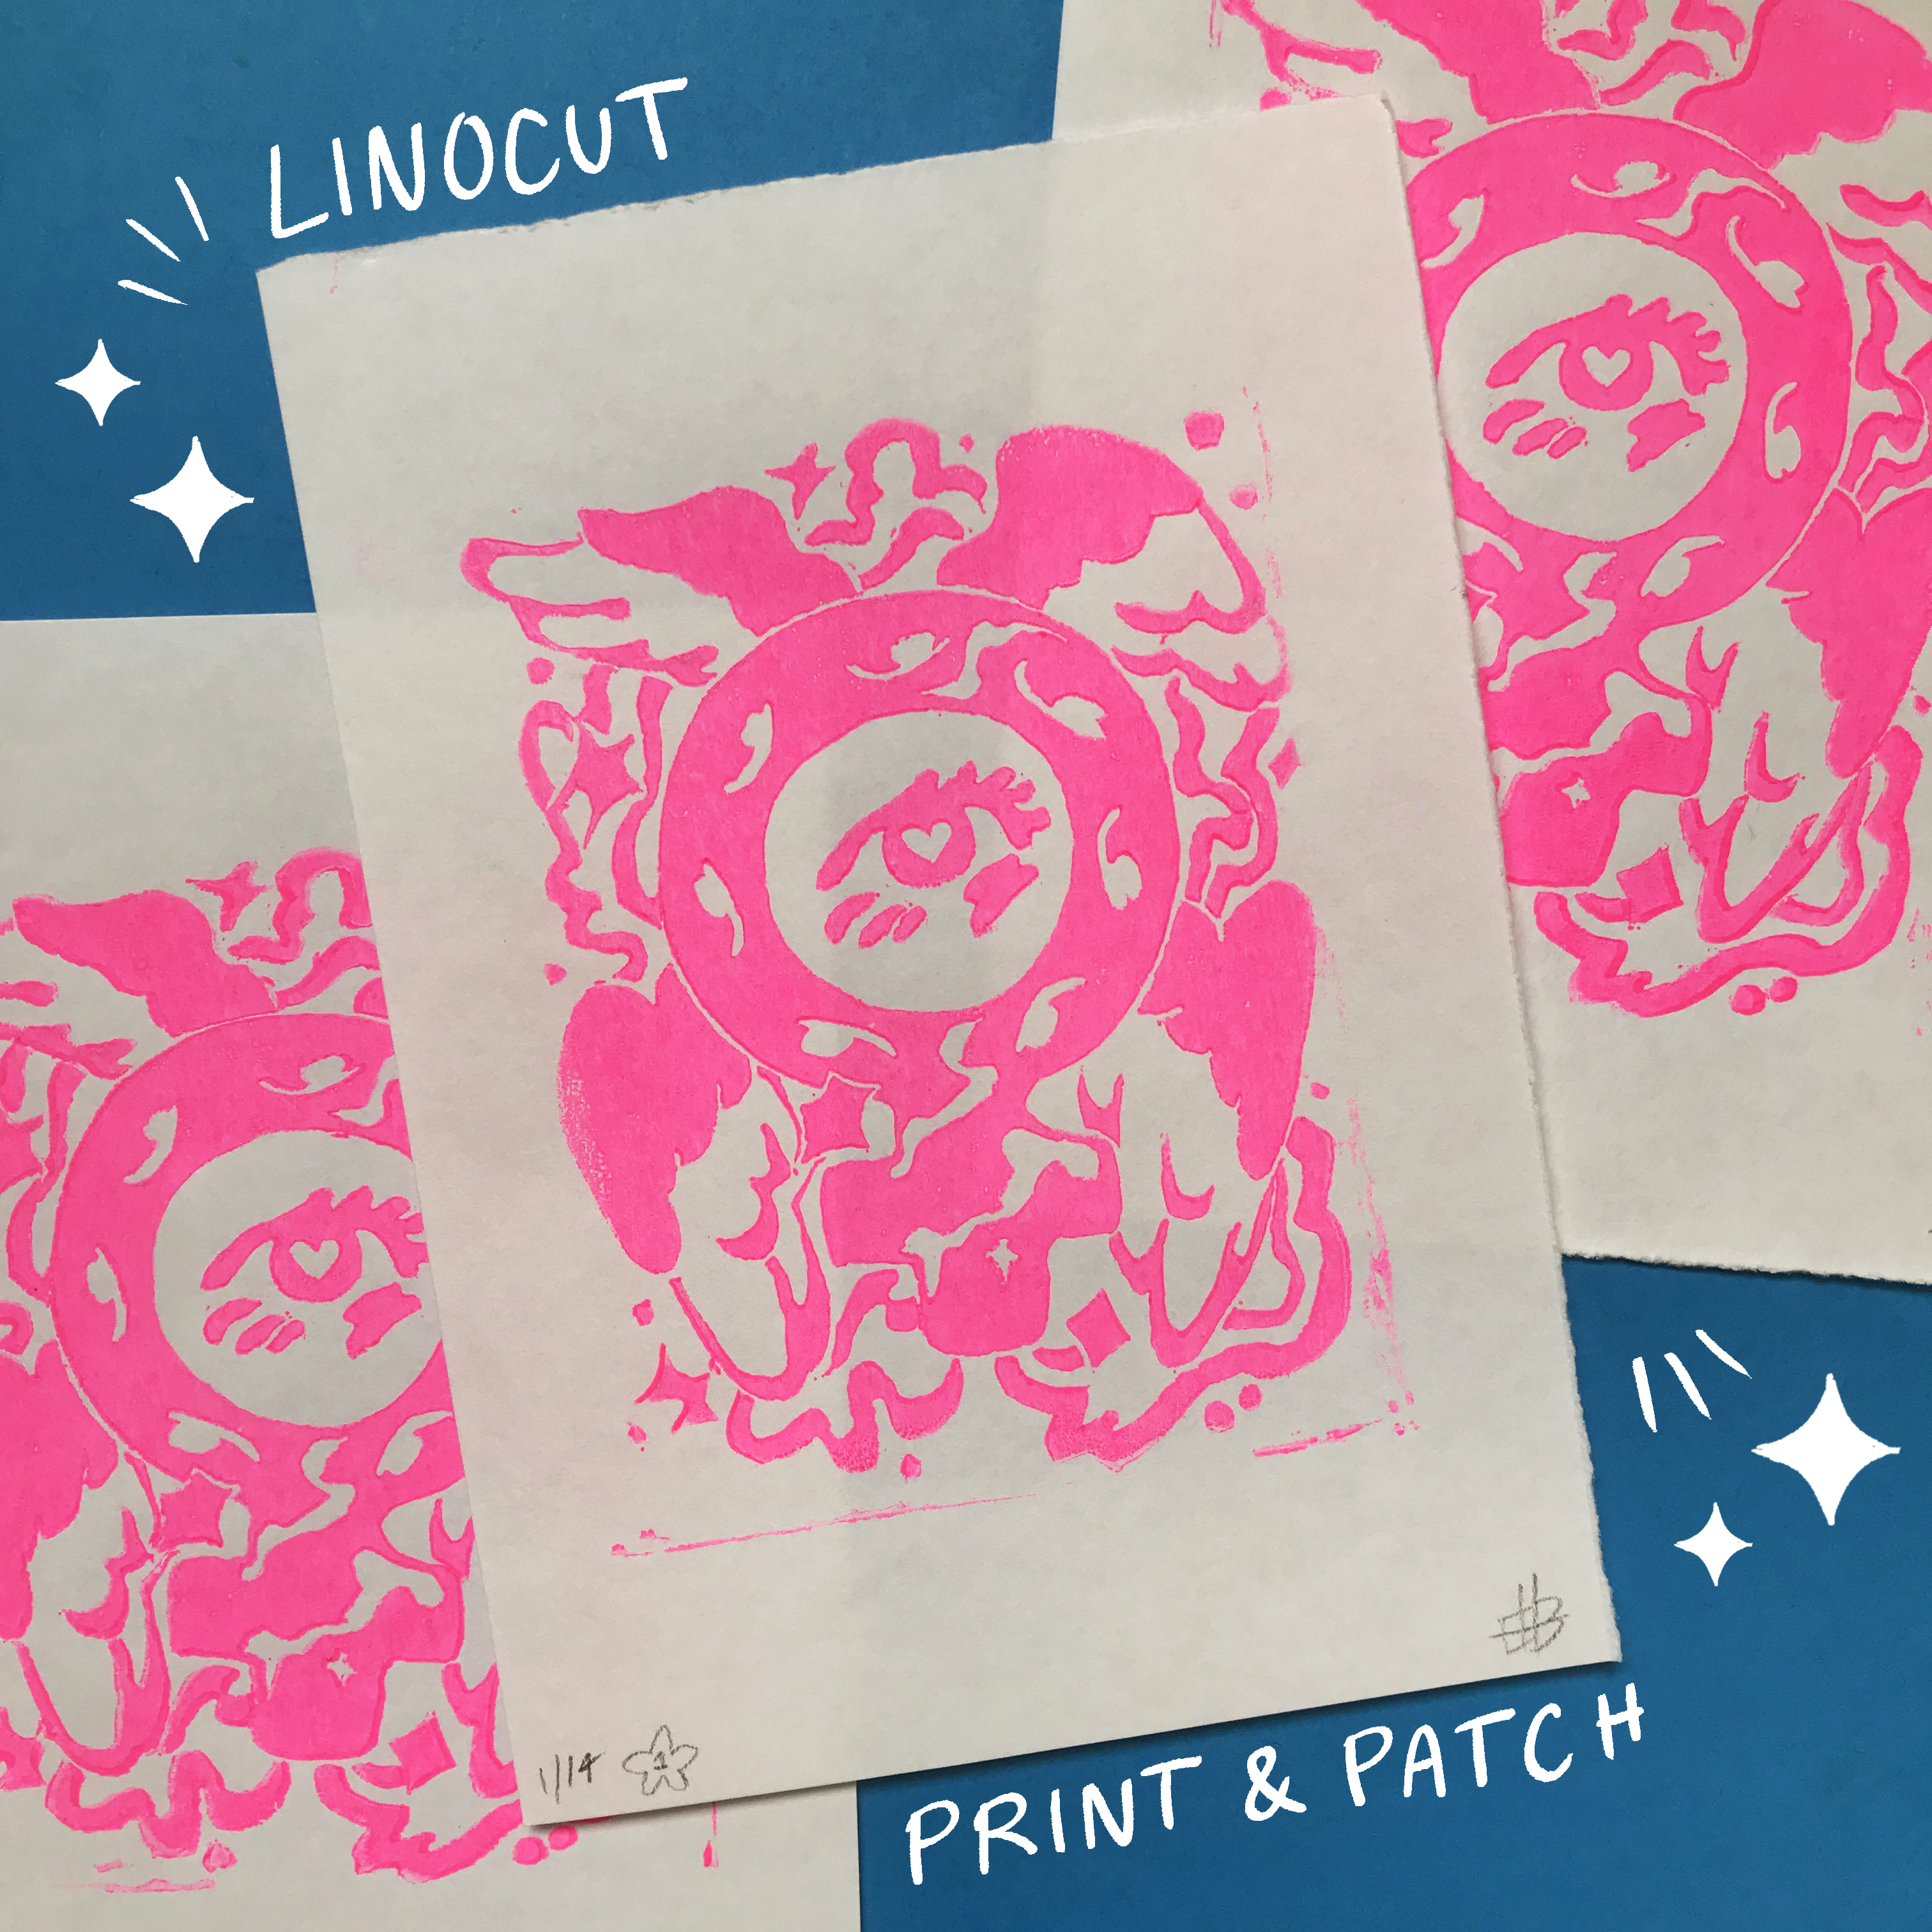 A product photo of a pile of linocuts in fluorescent pink on white paper against a blue background. The prints are of a venus sign stylised as a wheel-like angel, with wings coming out of it, eyes around the circular portion and sparkles and stars in the background.